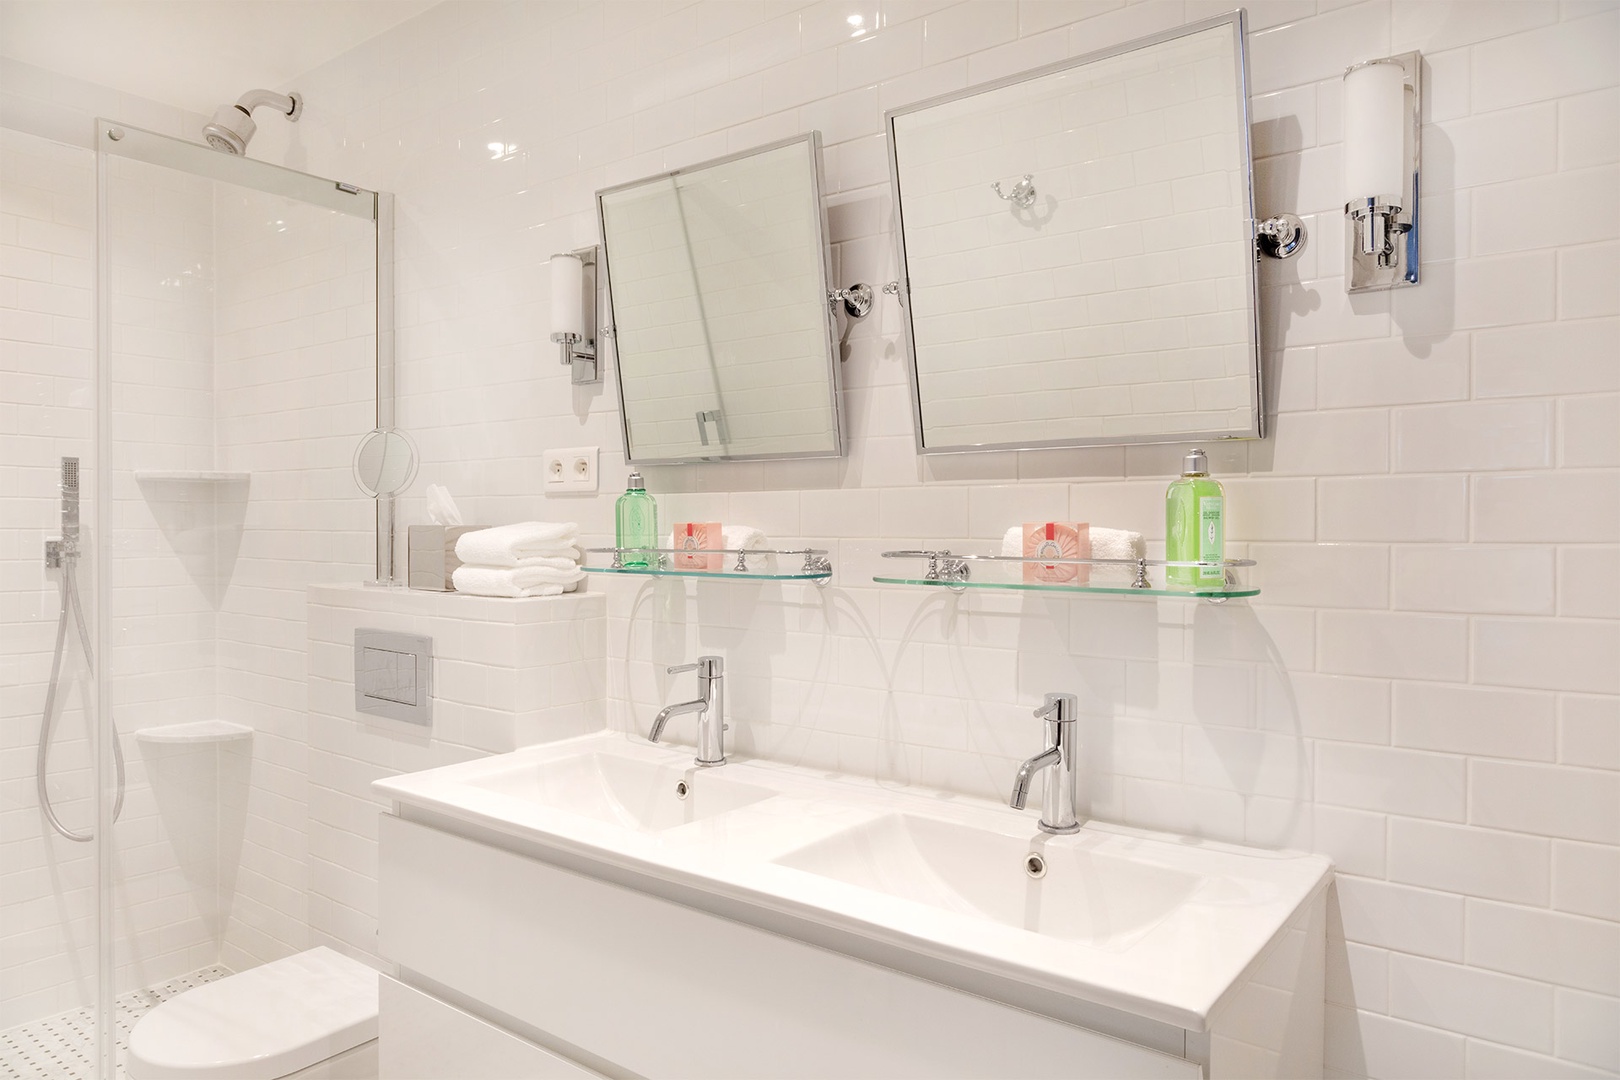 The en suite bathroom is equipped with a shower, toilet and double sink.